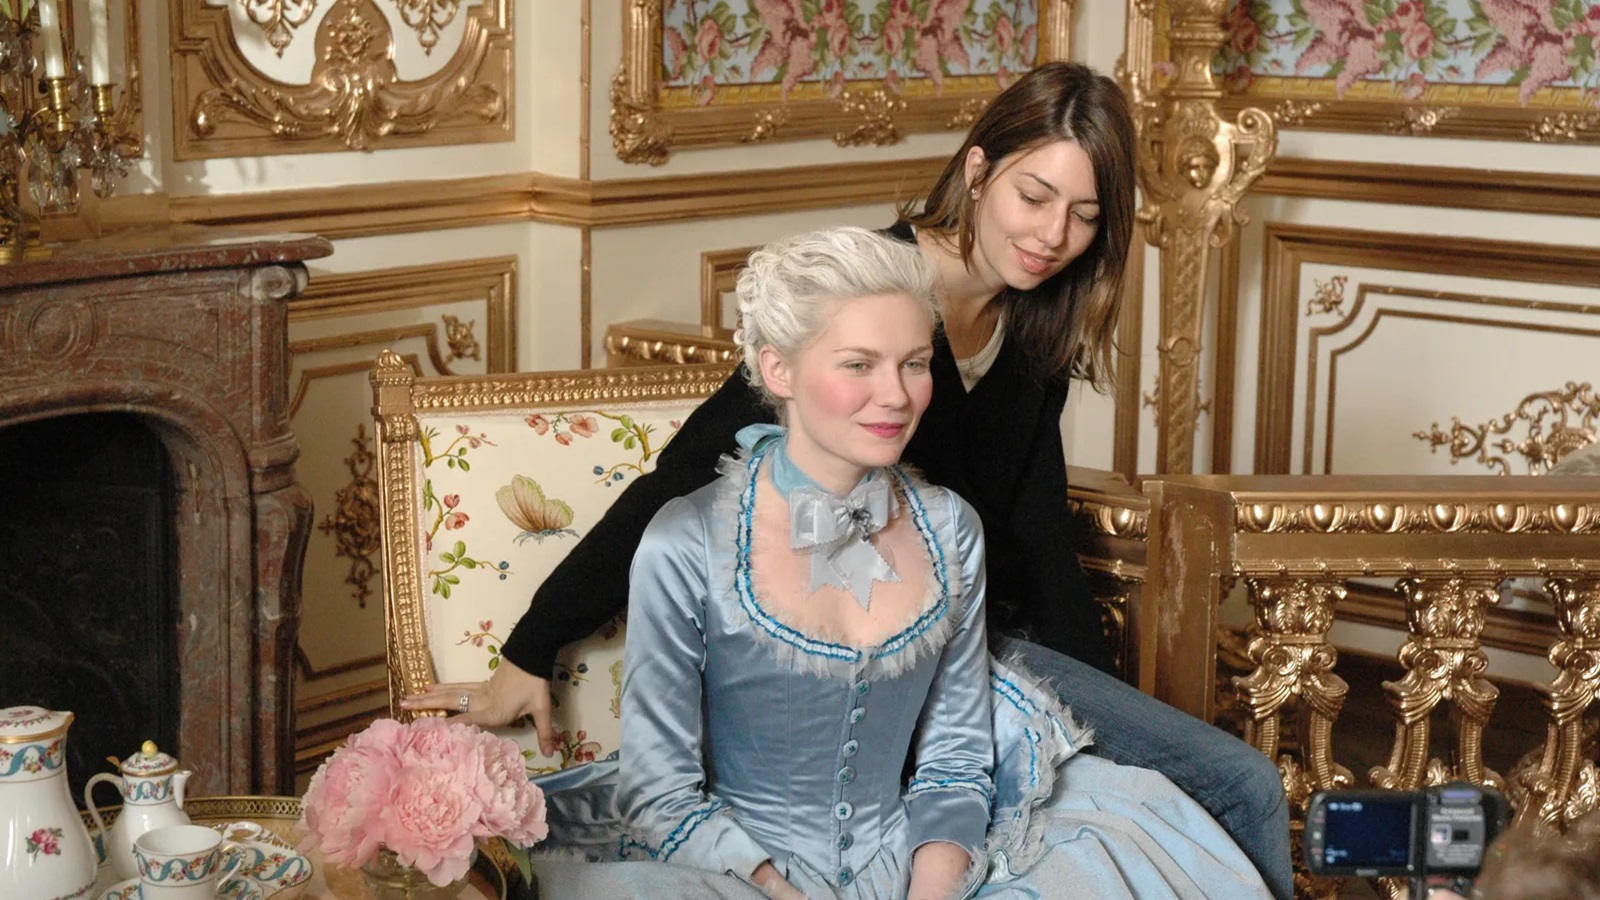 Marie Antoinette, Sofia Coppola: 'The film was a flop, but I'm happy it found its audience'